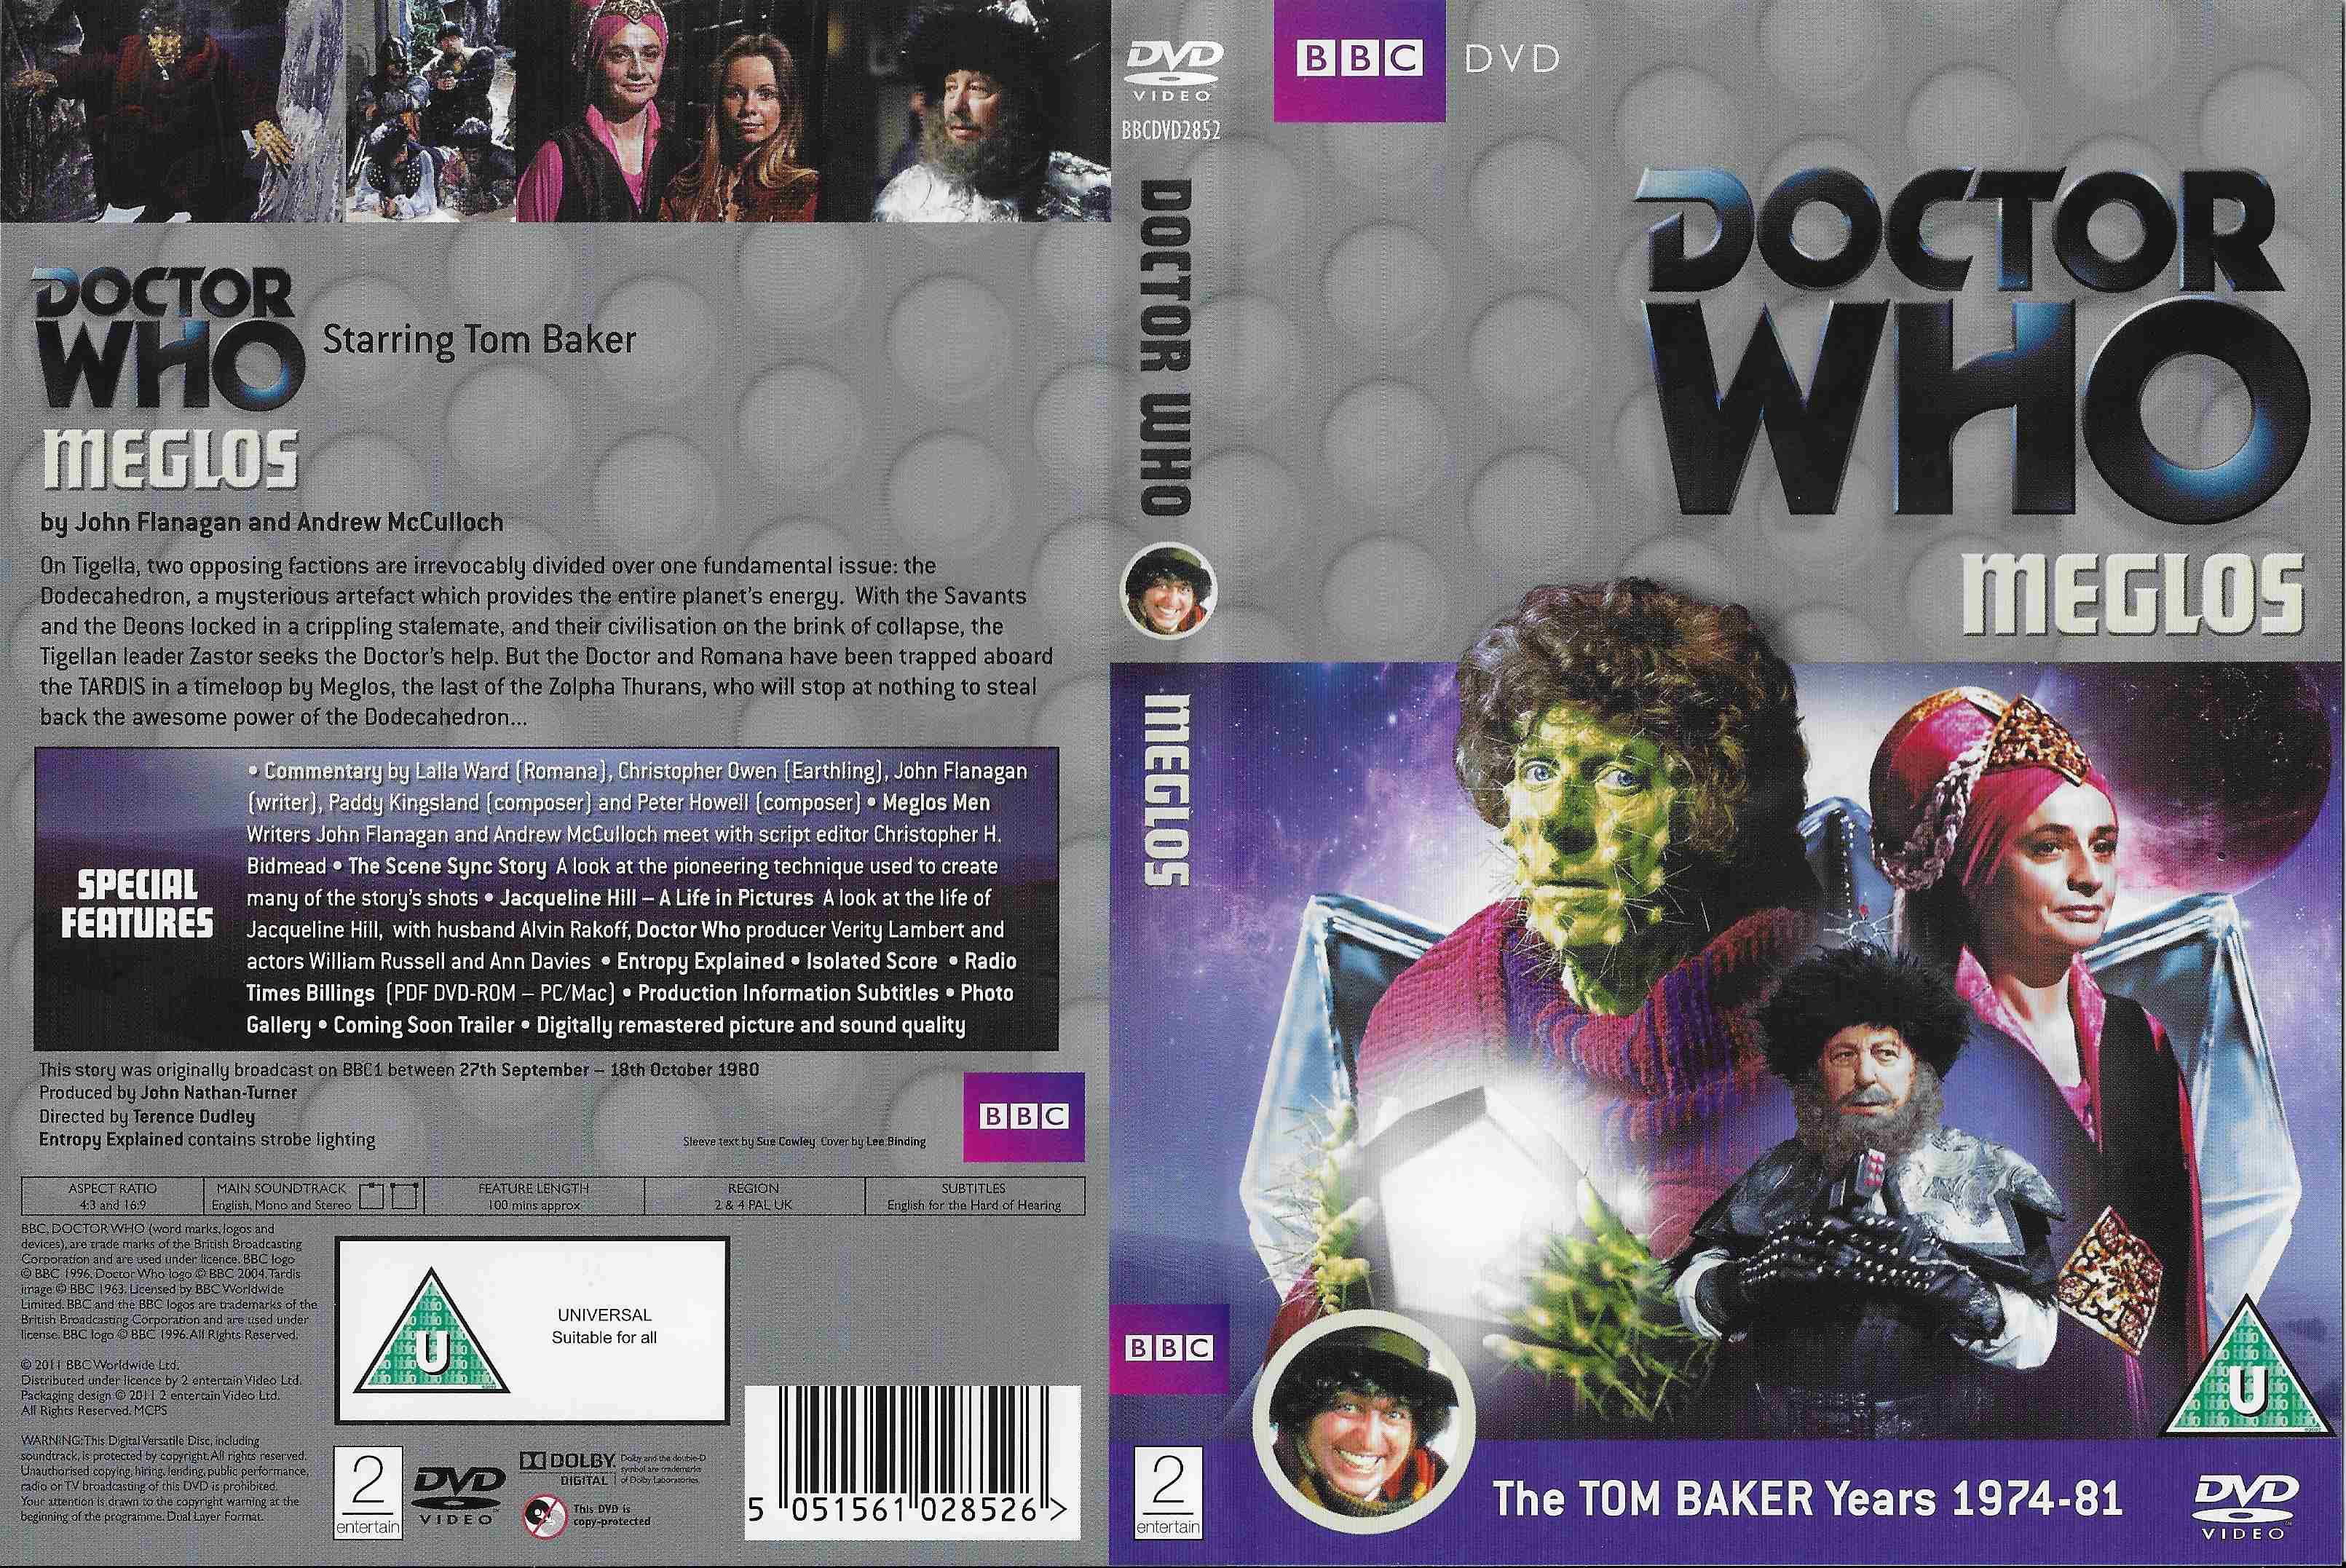 Picture of BBCDVD 2852 Doctor Who - Meglos by artist John Flanagan / Andrew McCulloch from the BBC records and Tapes library